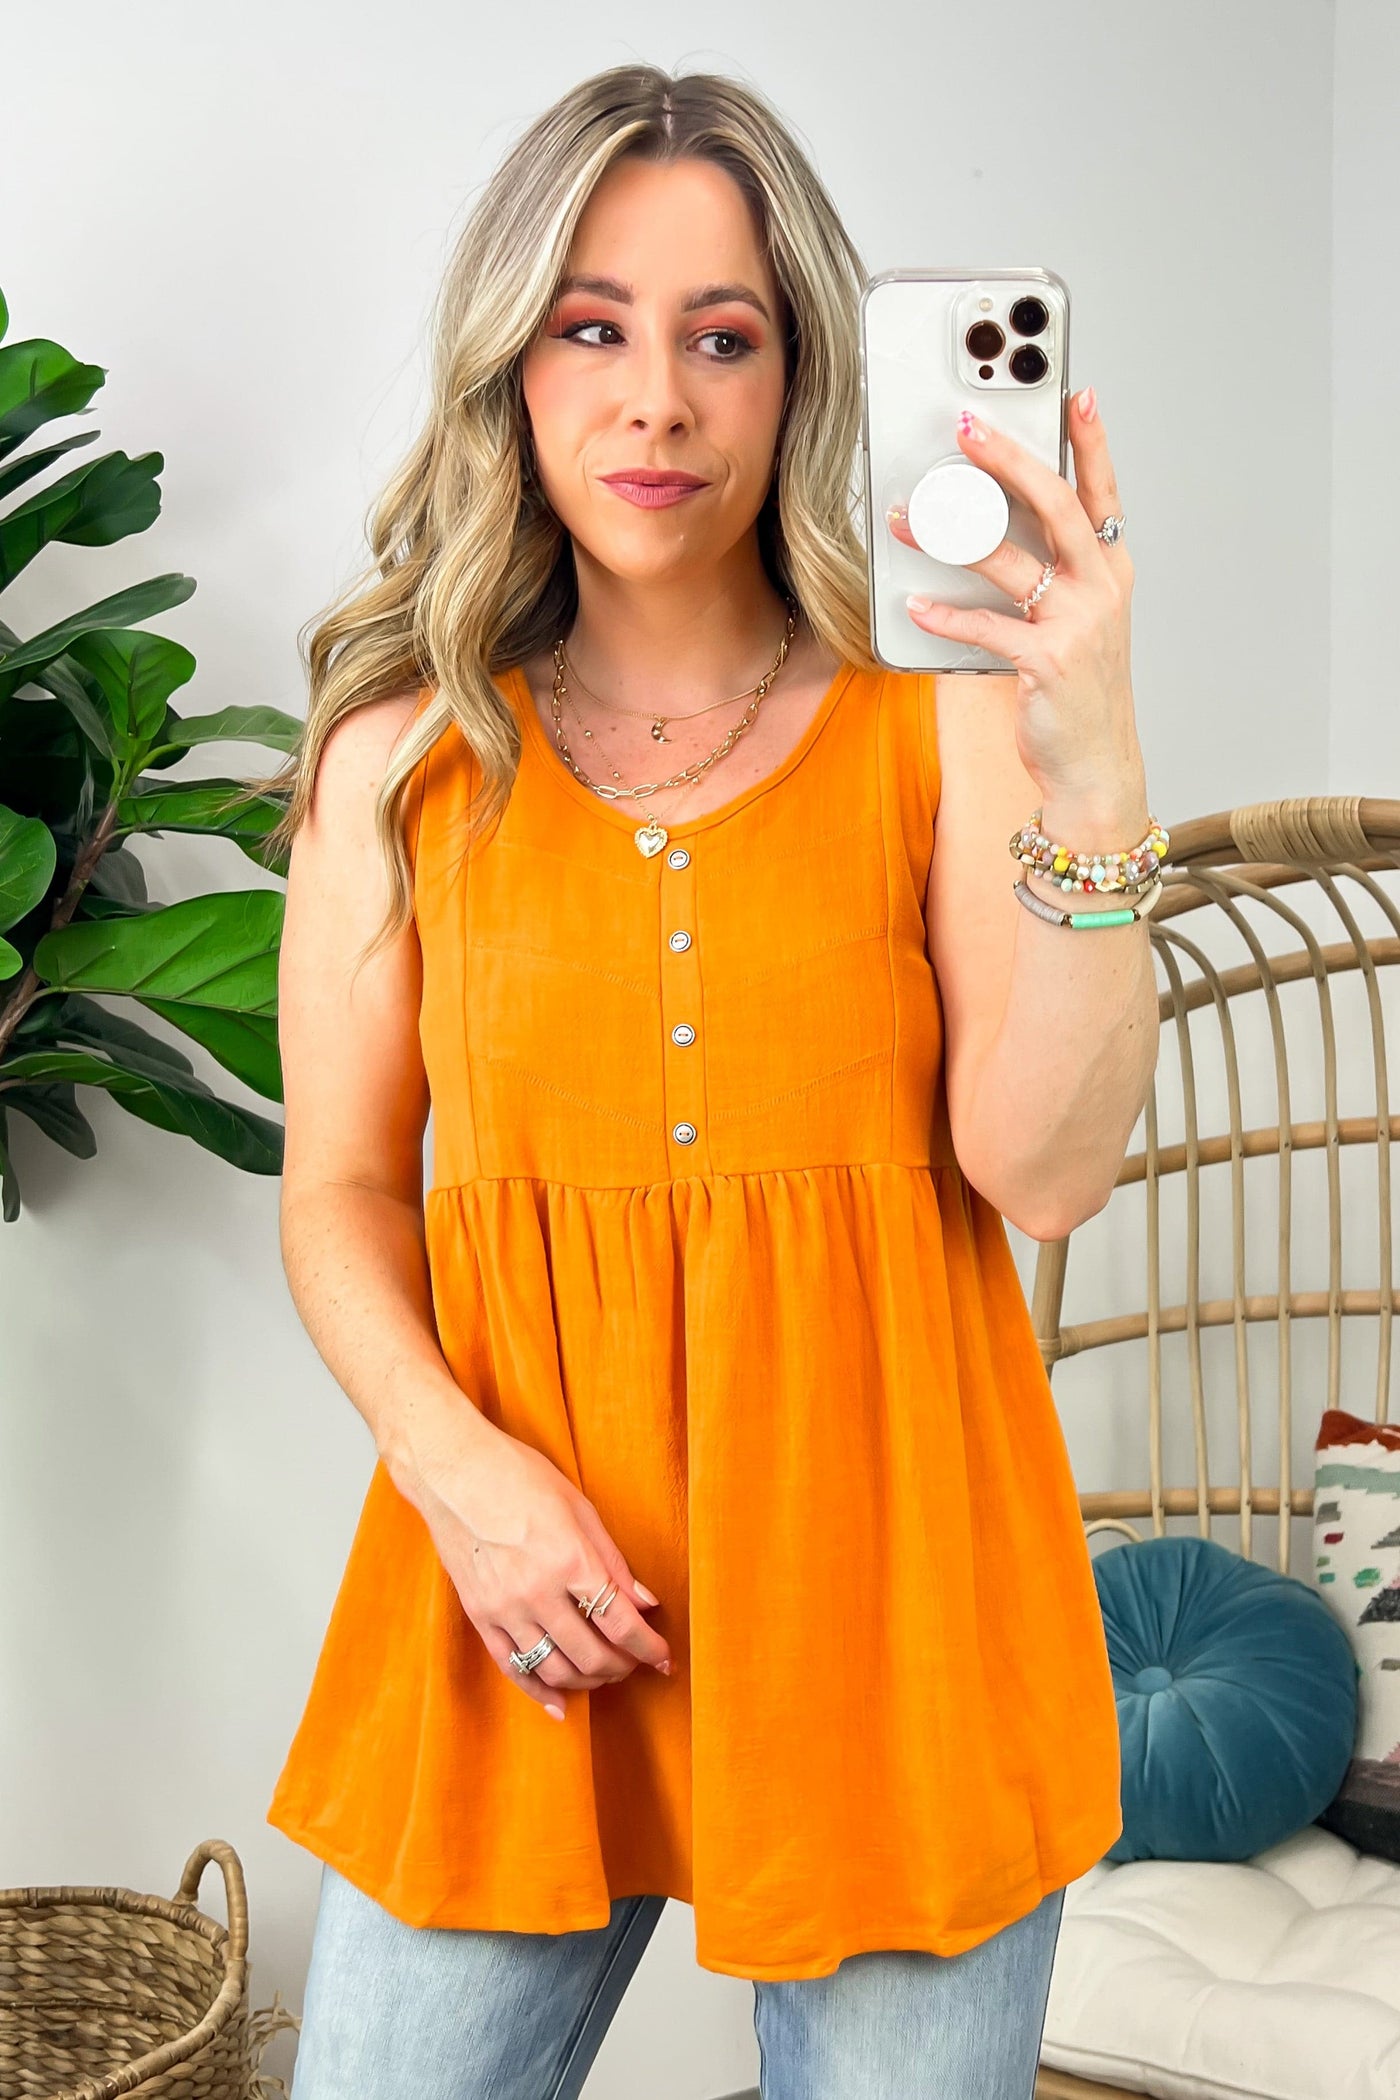  You First Button Detail Peplum Tank Top - FINAL SALE - Madison and Mallory